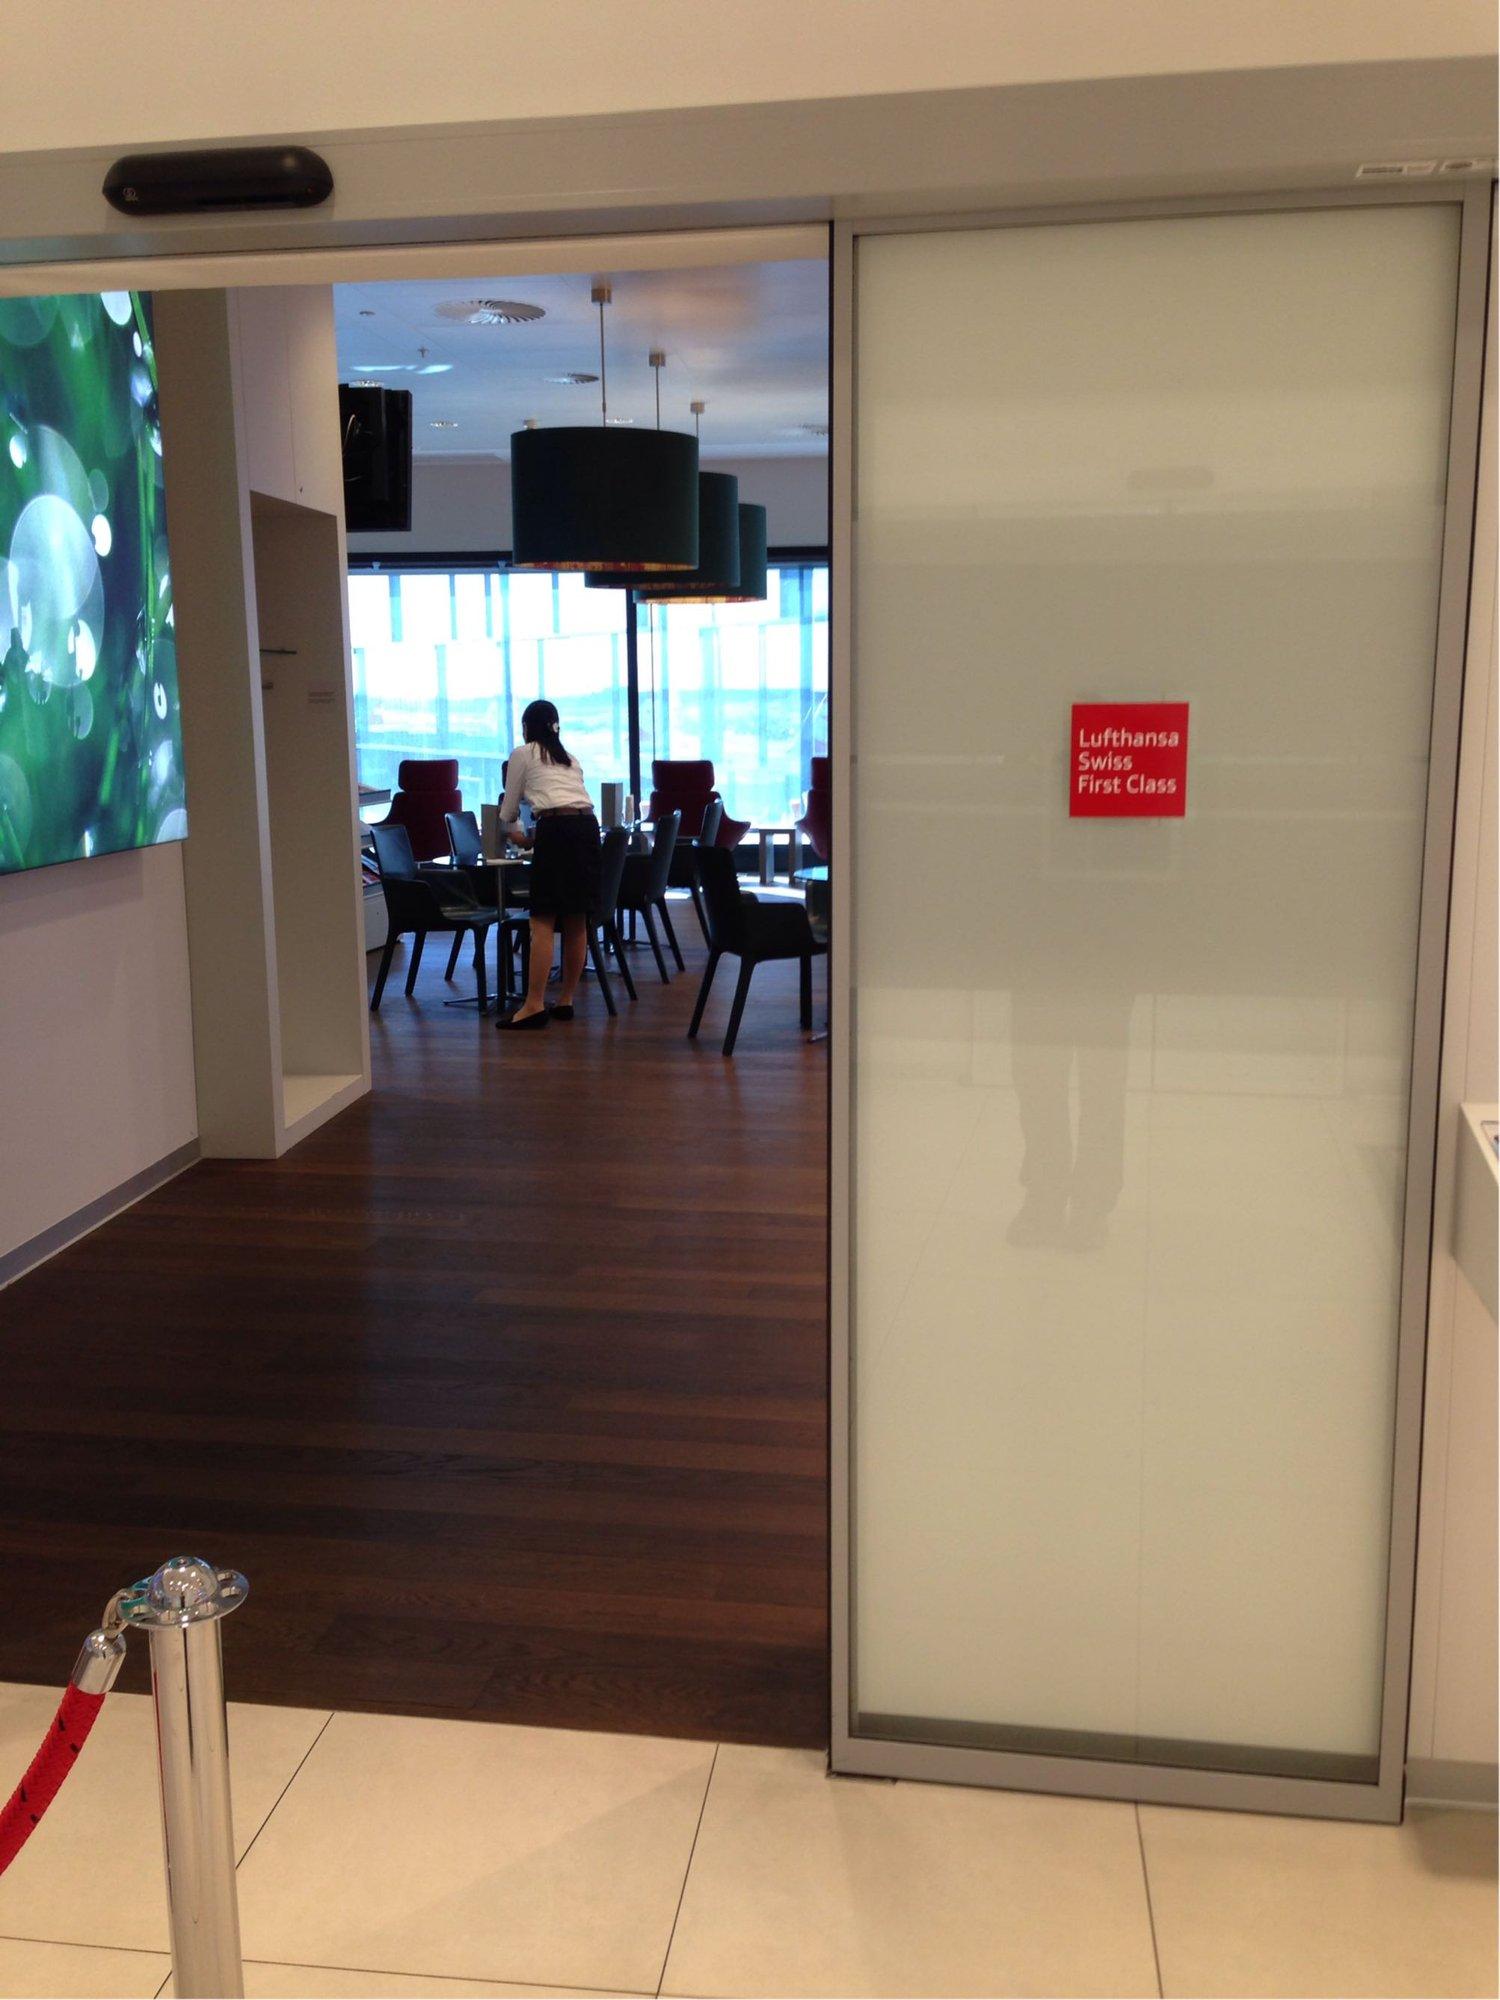 Austrian Airlines HON Circle Lounge image 5 of 5